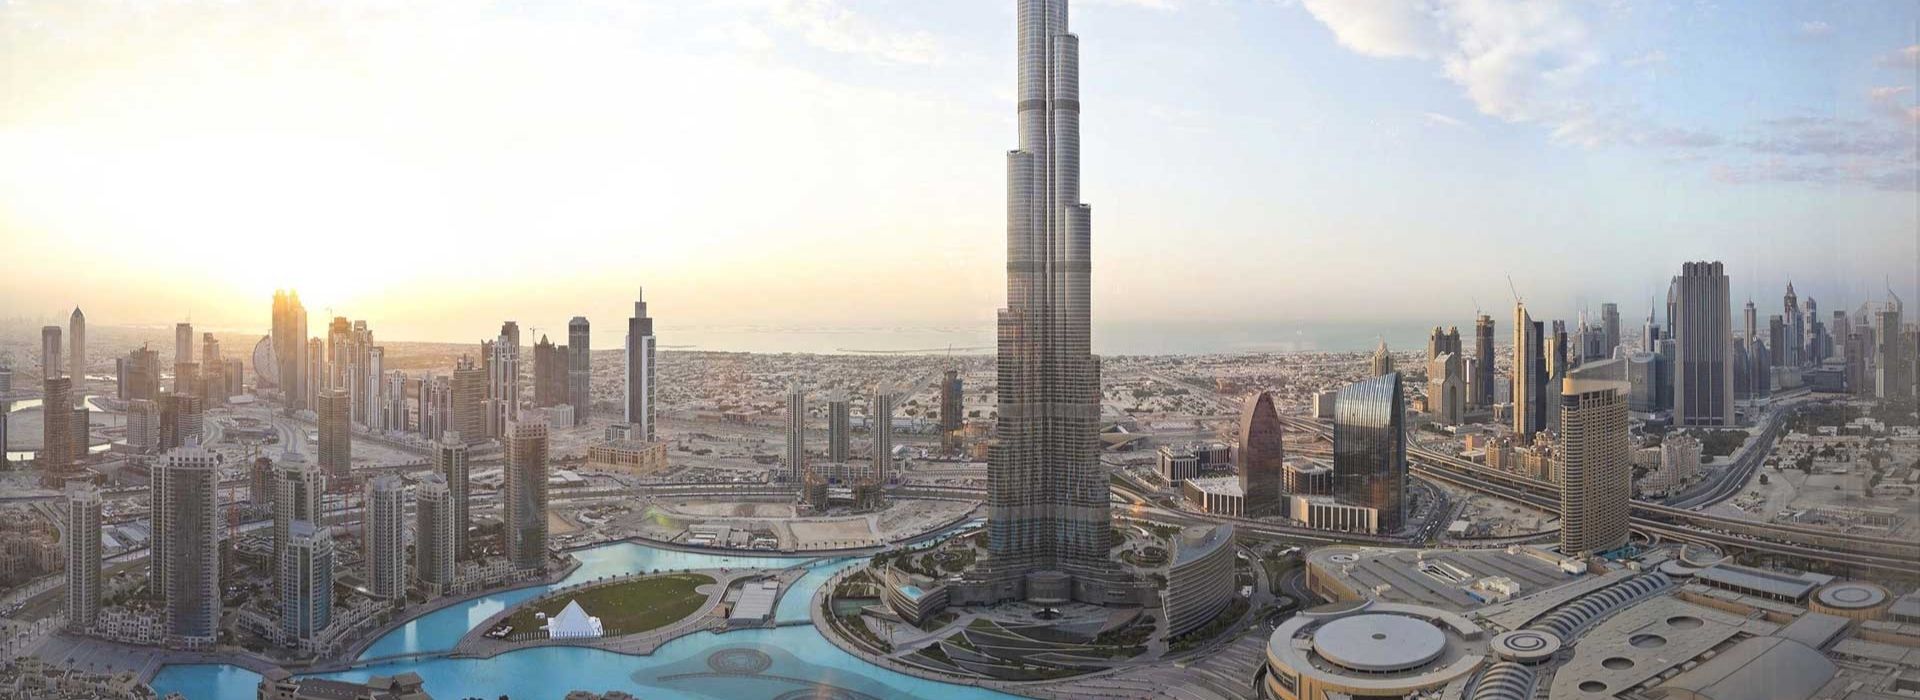 From Burj Khalifa to Shanghai Tower: Highest Buildings in The World